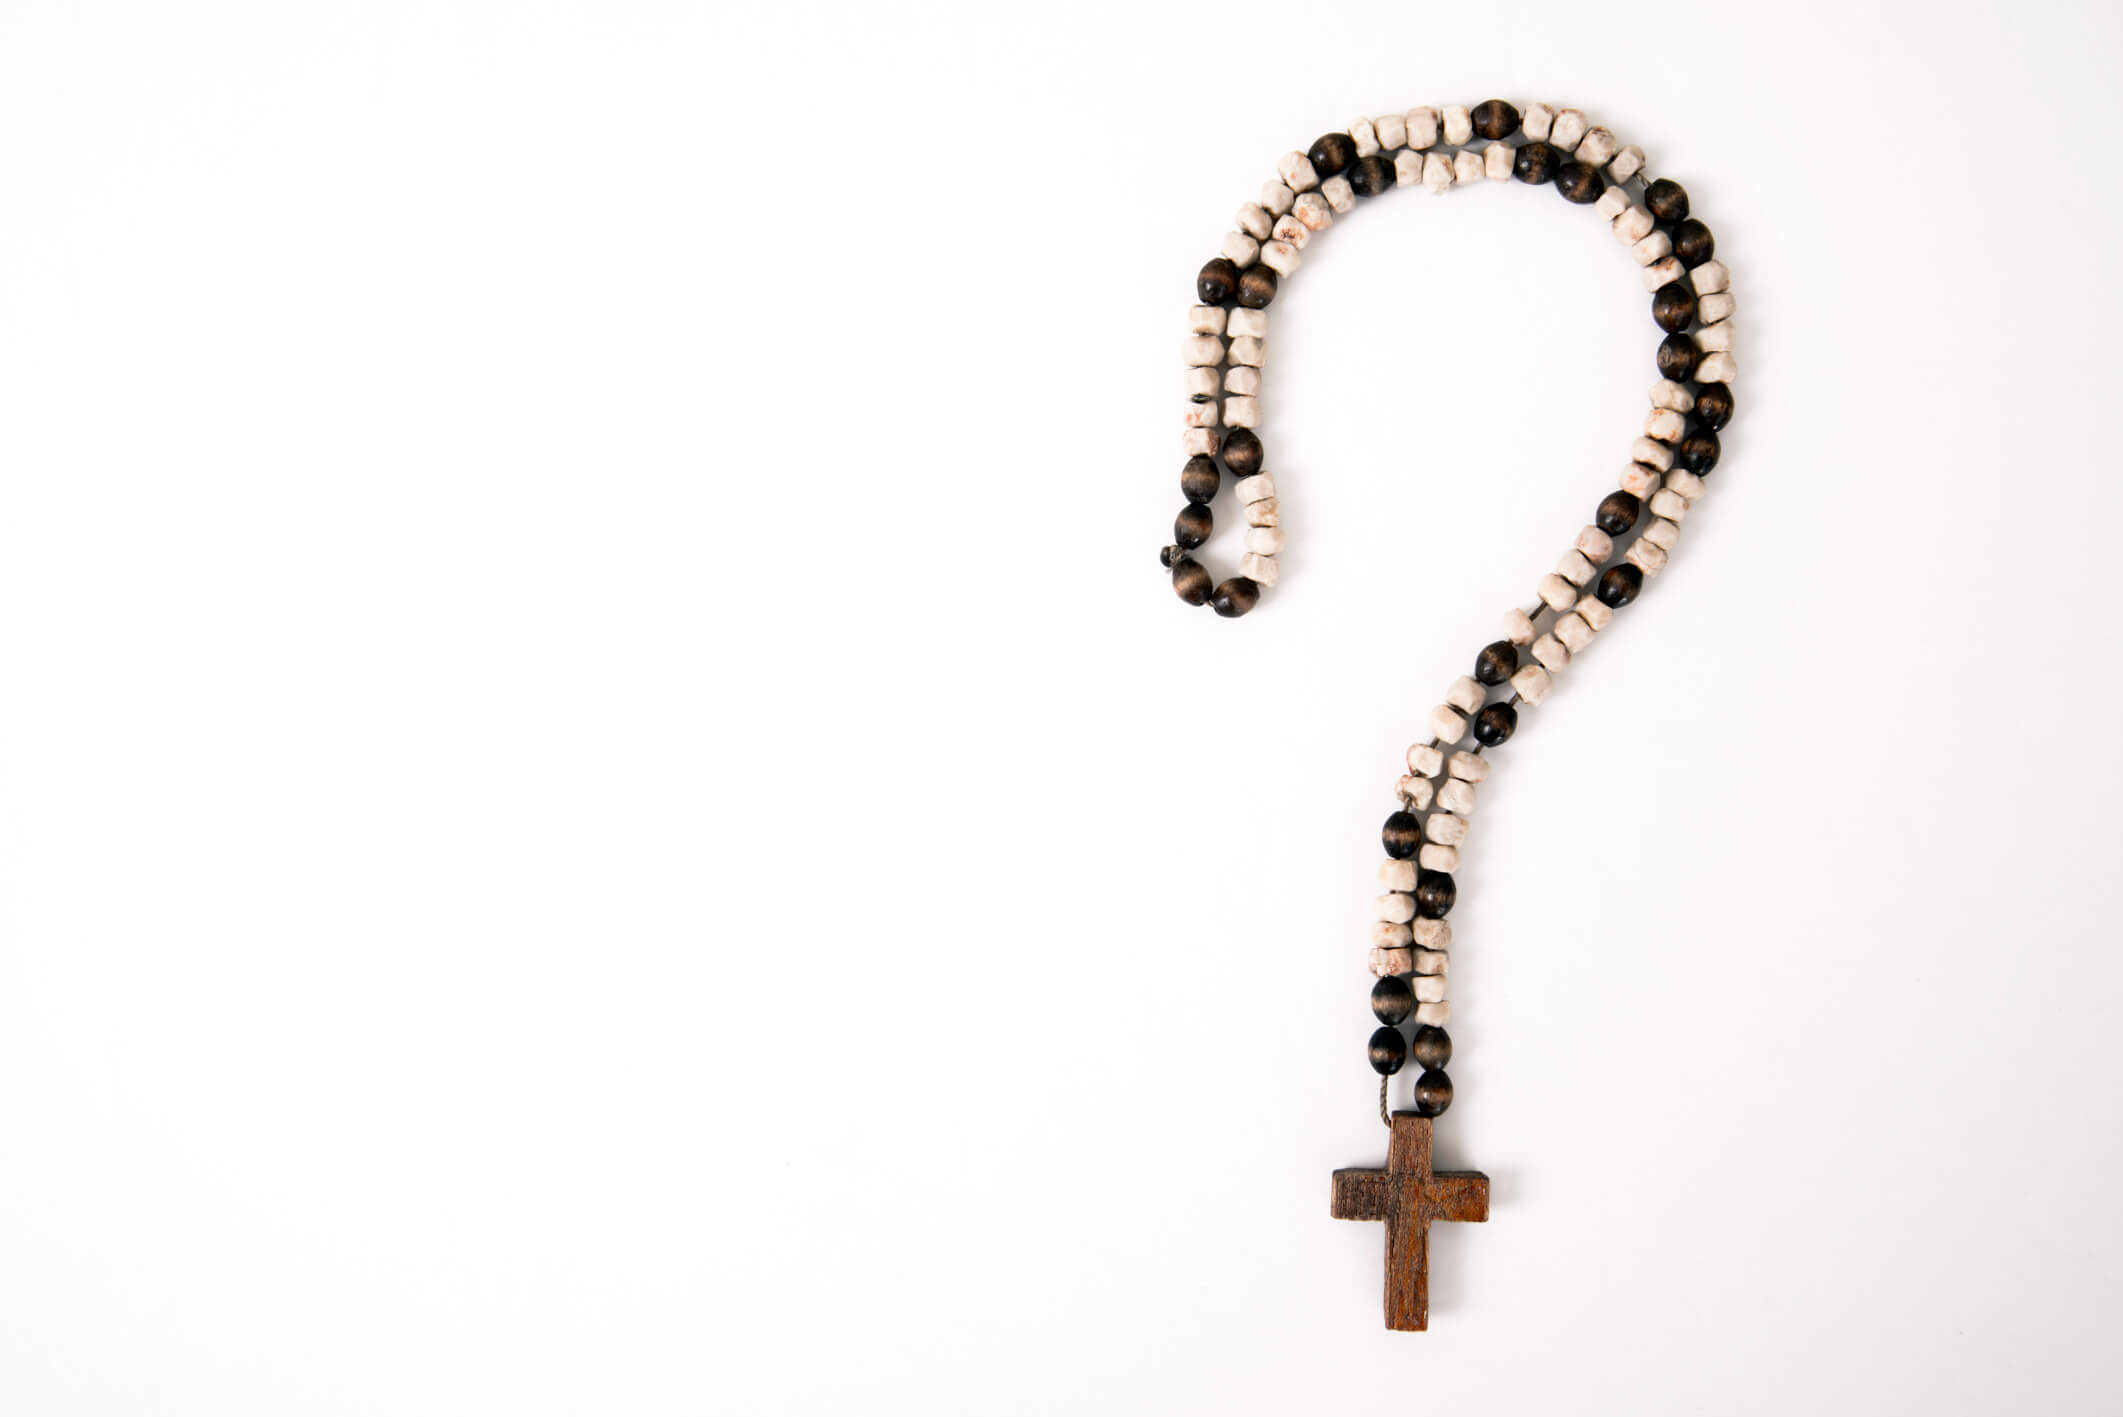 A cross necklace forming a question mark